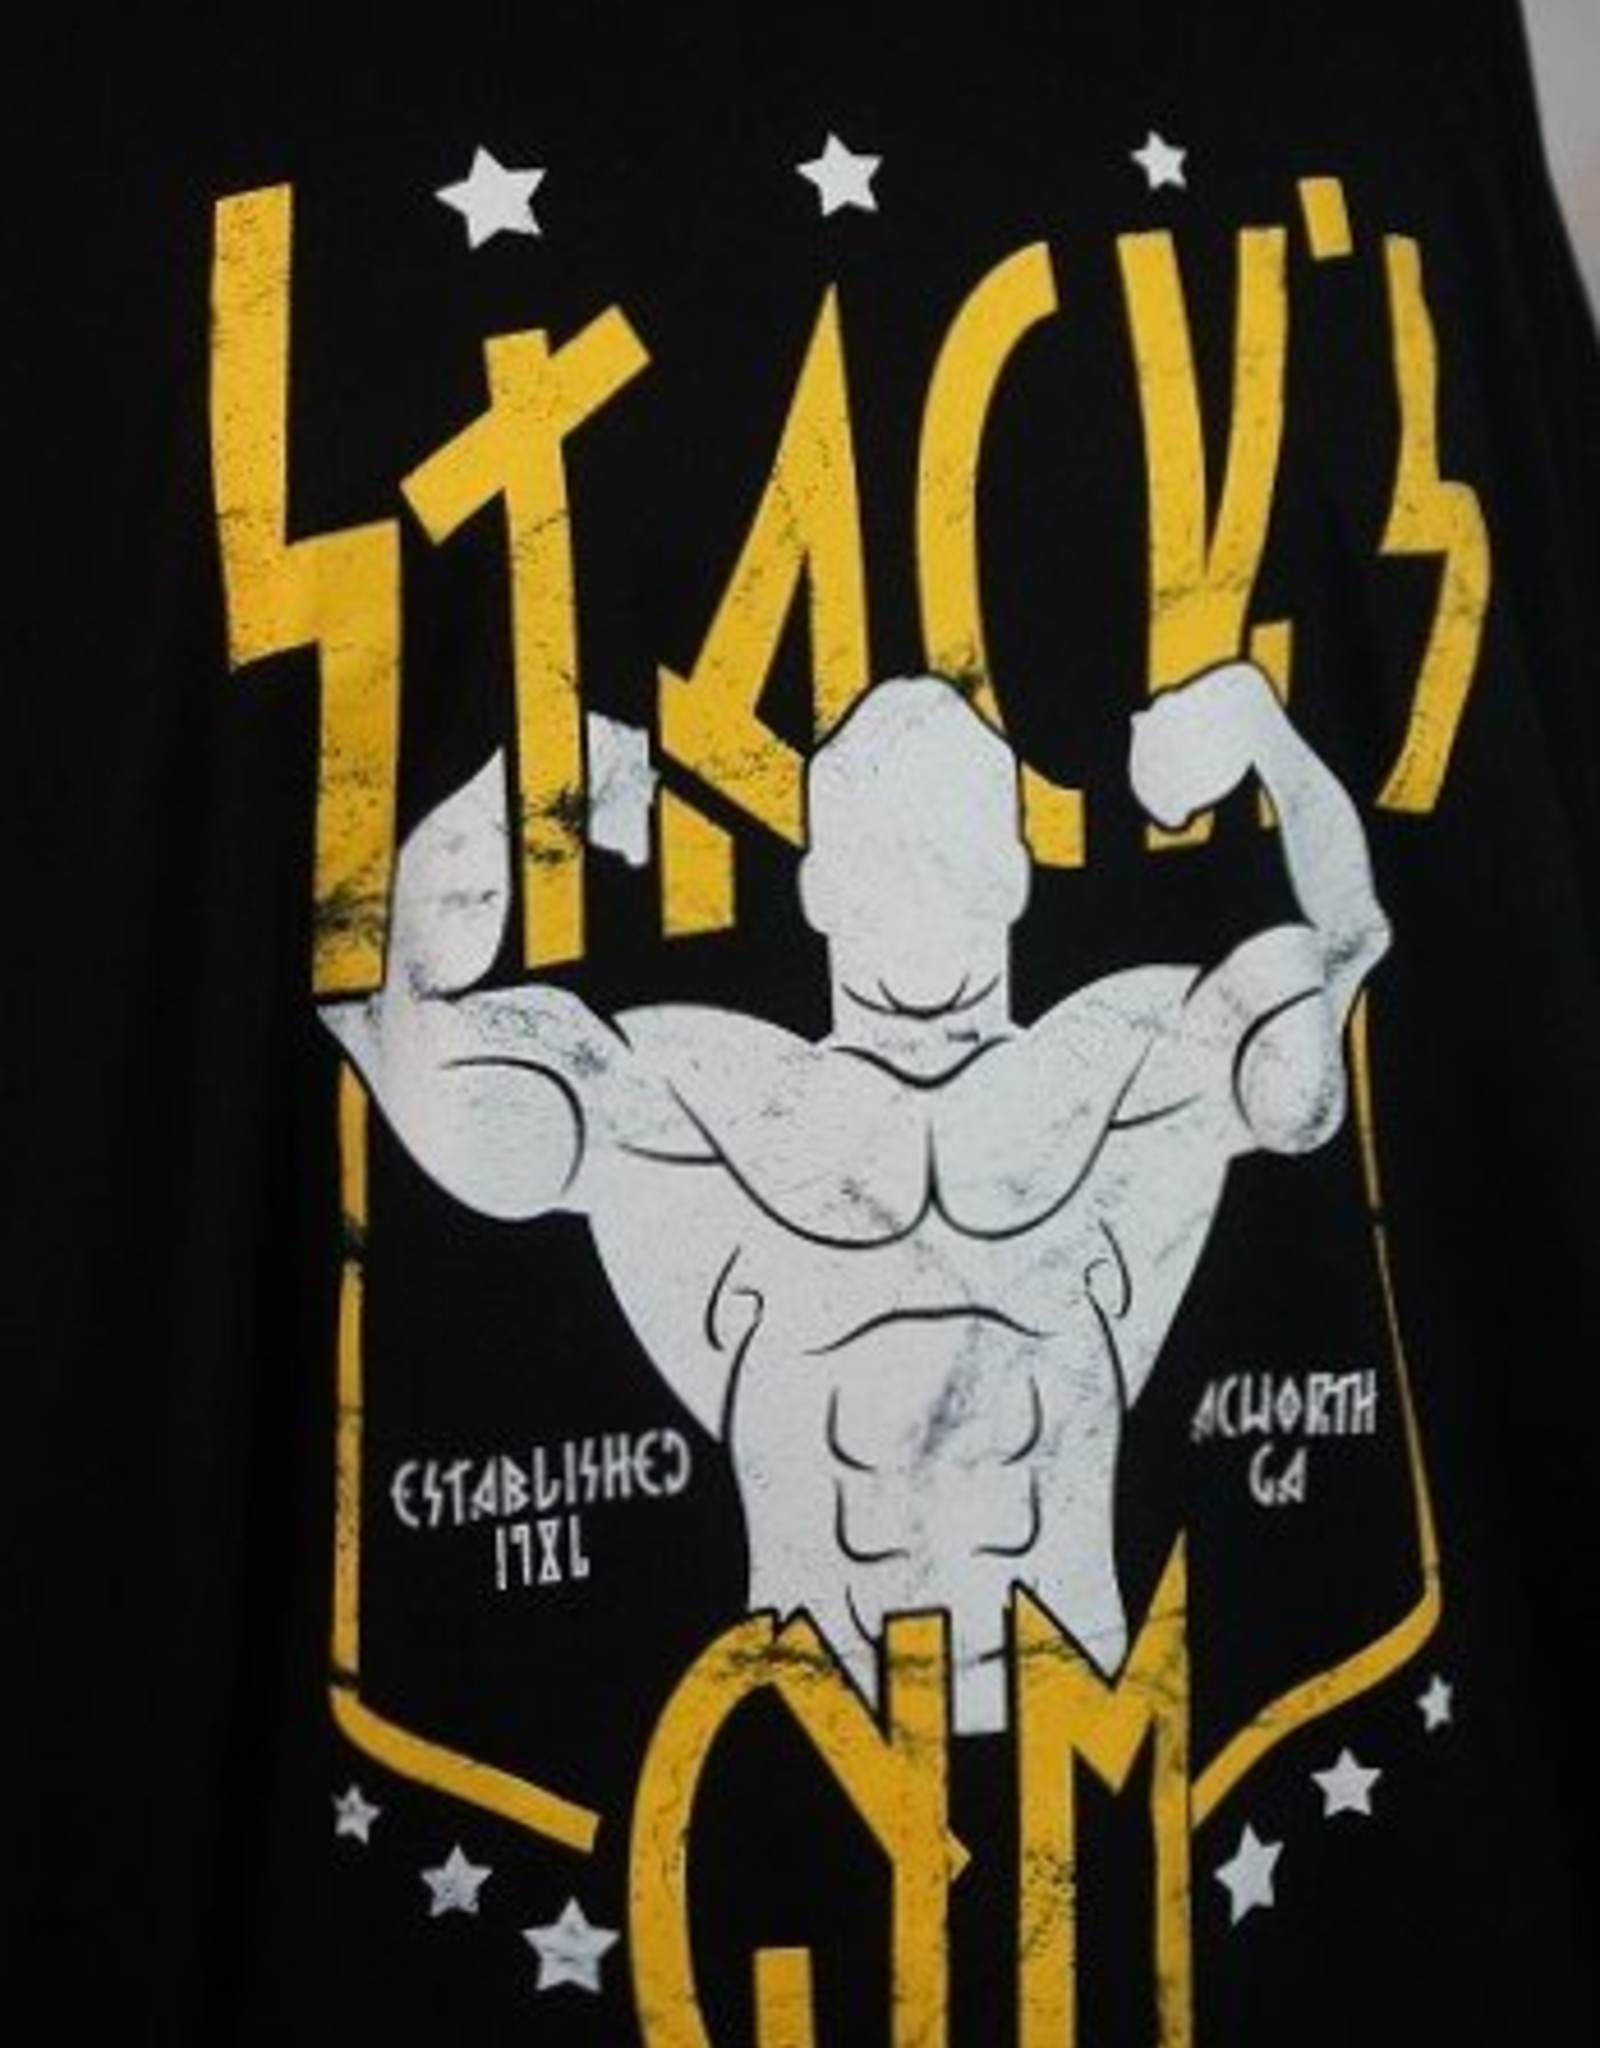 Stack's Gym Stack's Gym Flexing Logo Tee